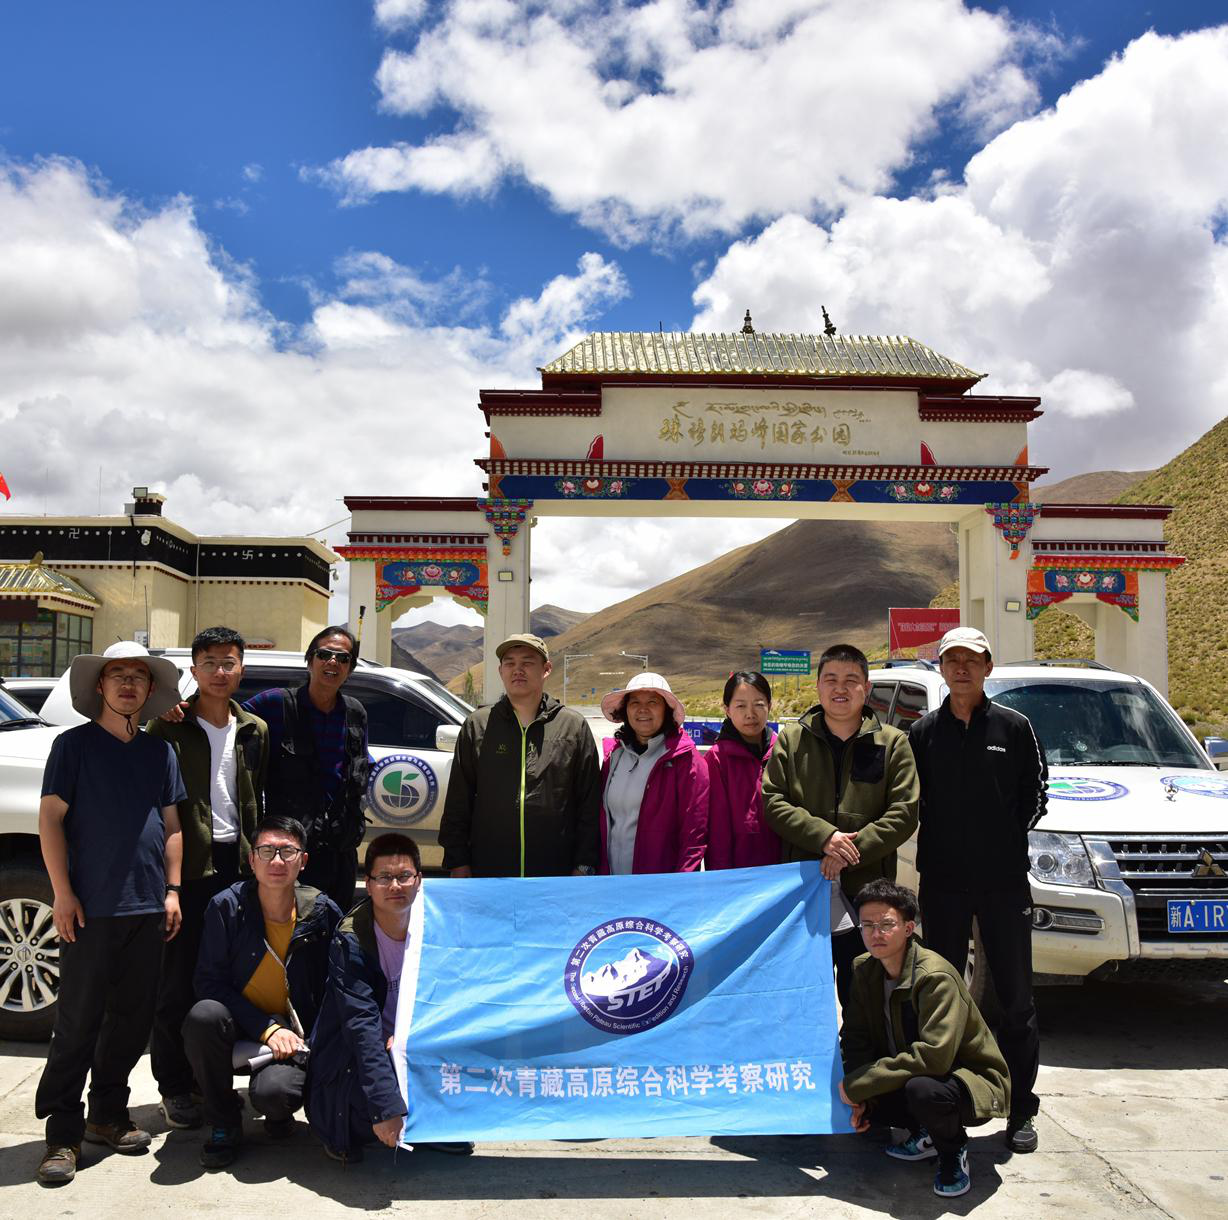 Urban and rural tourism in the Qinghai Tibet Plateau scientific research on Sichuan Tibet and Qinghai Tibet lines (2020)